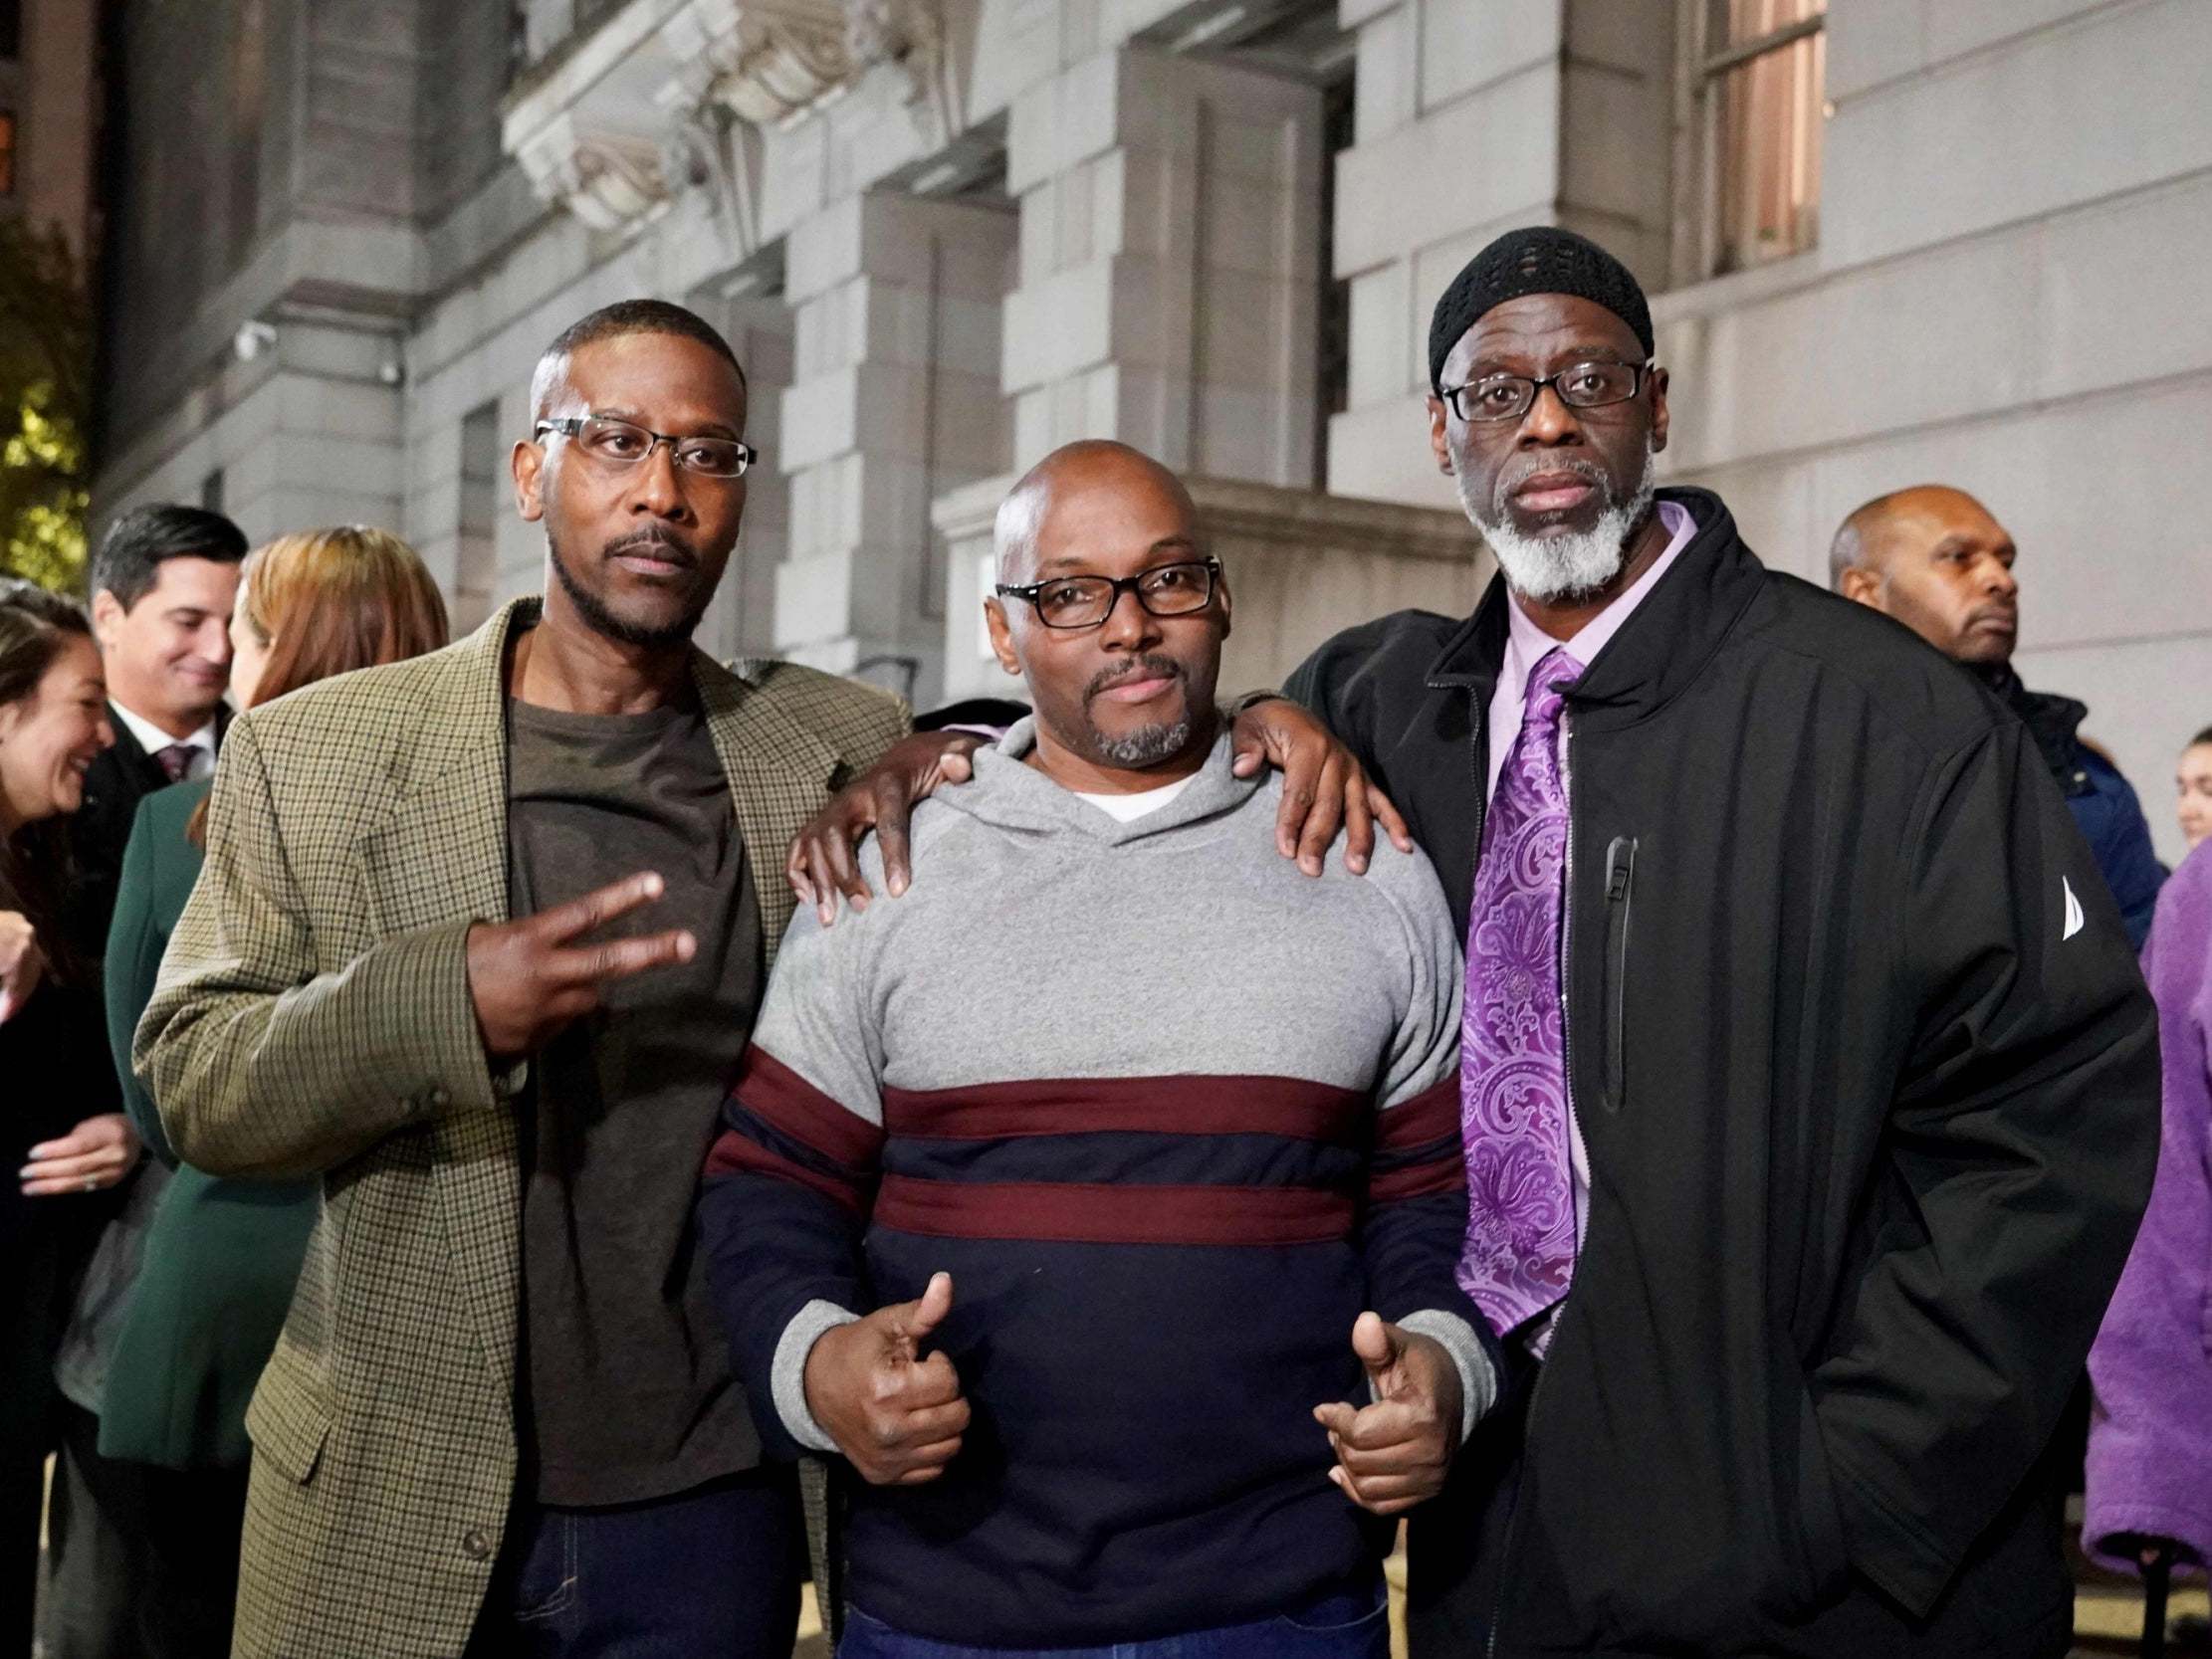 (L-R) Alfred Chesnut, Andrew Stewart and Ransom Watkins pose for a photo after being released from prison in Baltimore, Maryland, US, on 25 November 2019 after serving 36 years for a murder they did not commit.